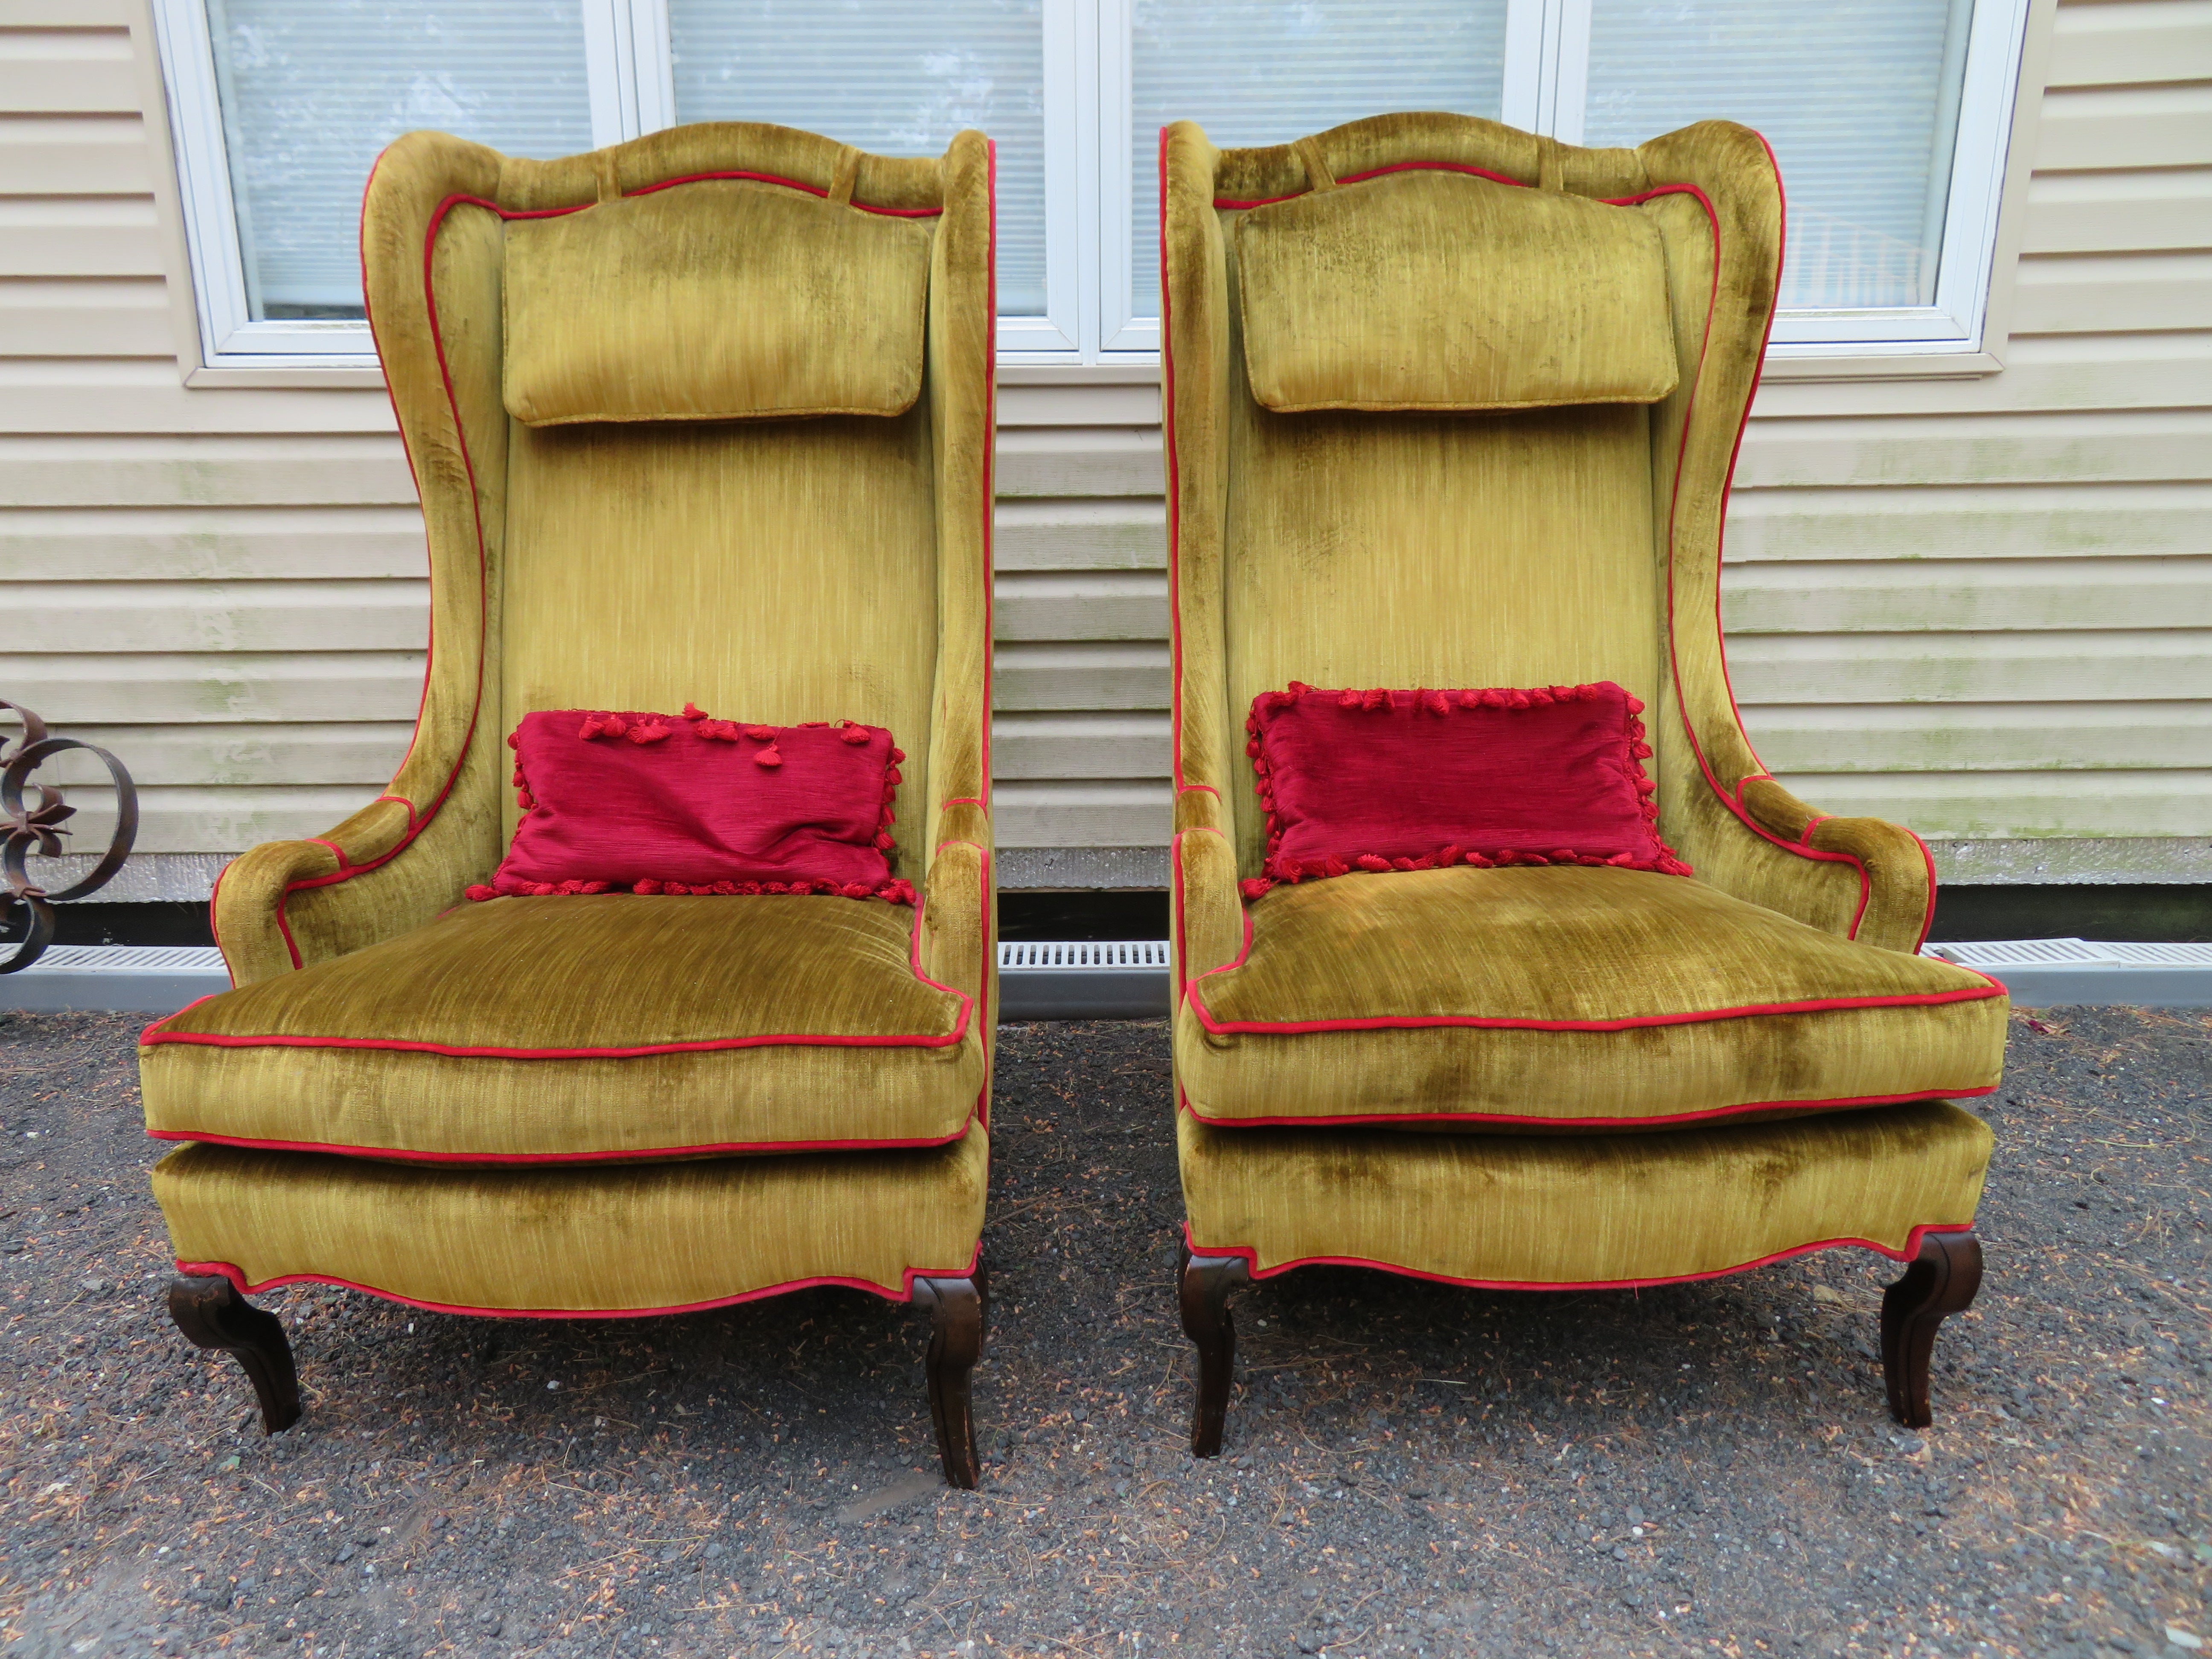 Wonderful pair of Dorothy Draper-style tall wingback chairs. We just love the way the original designer upholstered these with the bold red piping and matching fringed velvet lumbar pillows-very charming indeed. The original olive green velvet shows